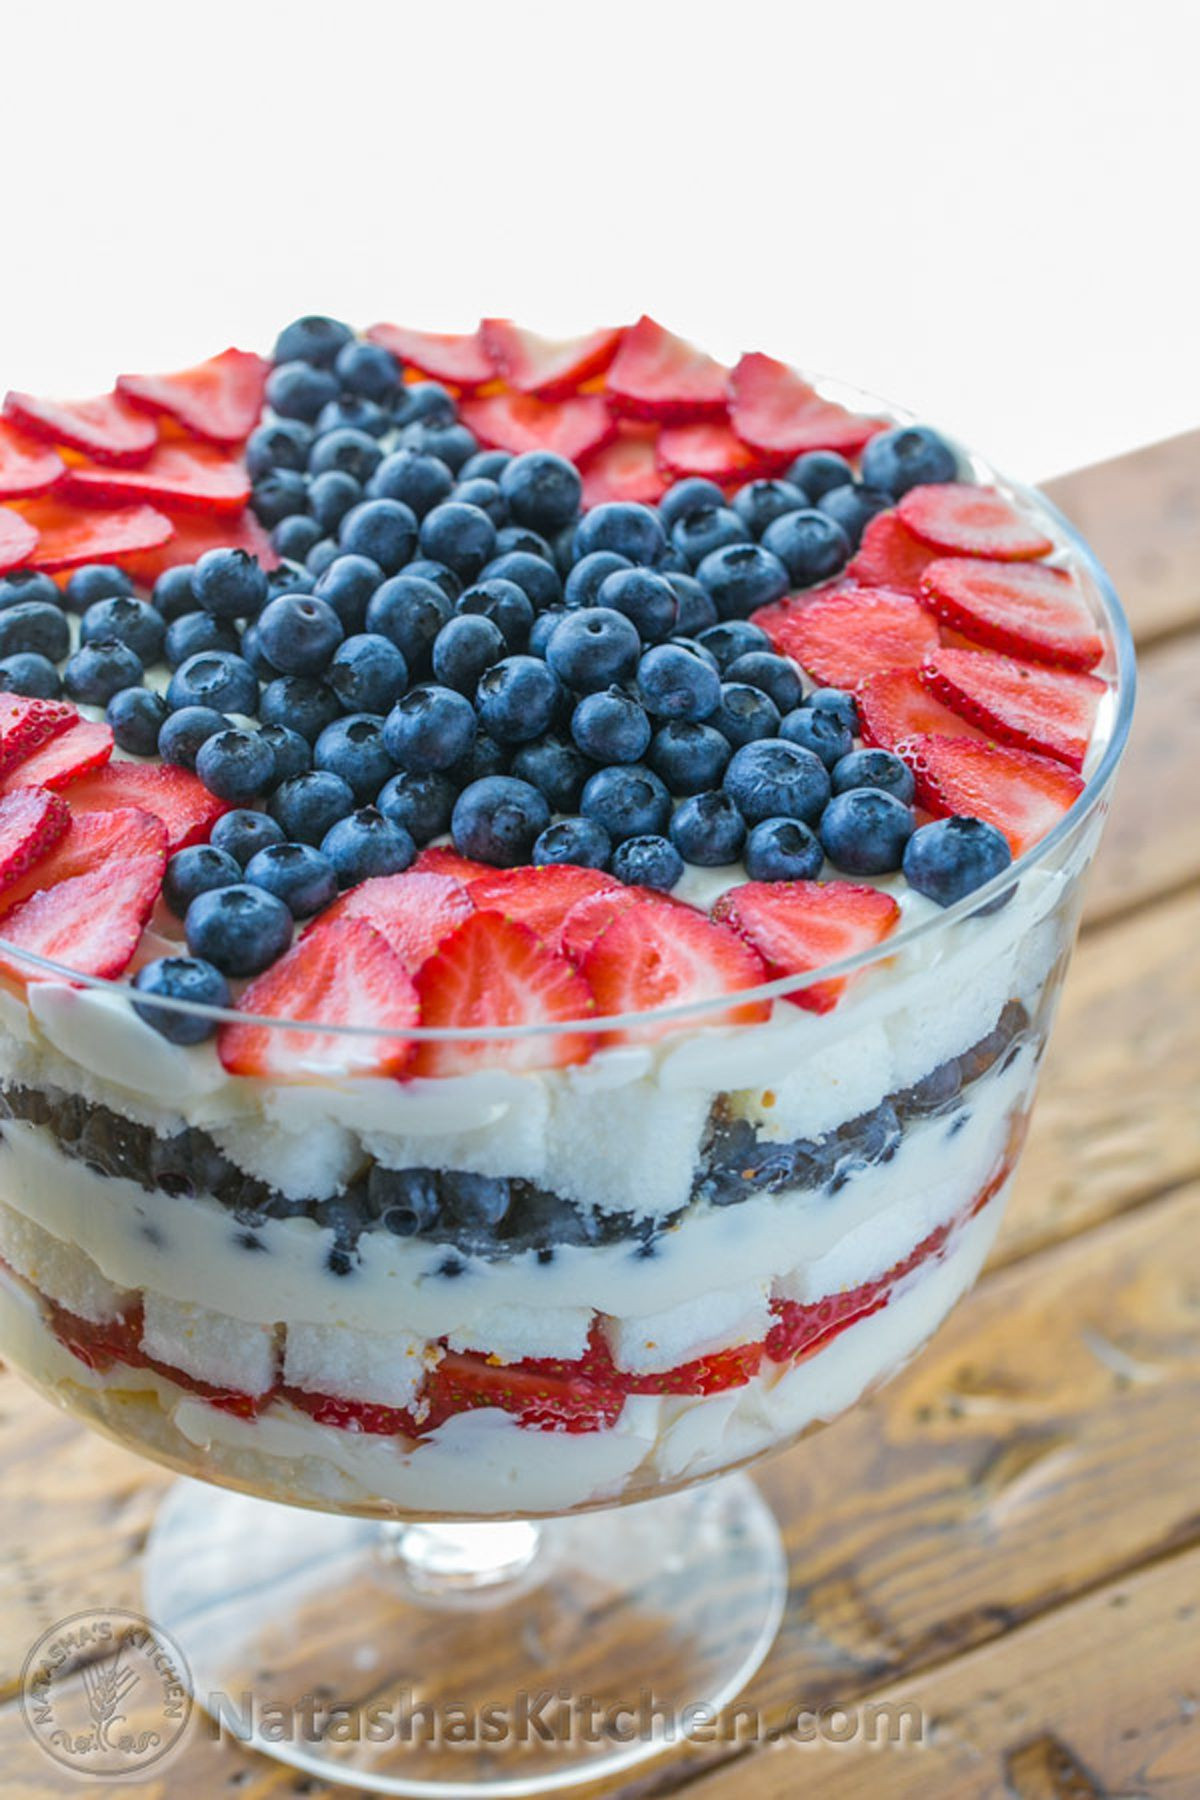 No Bake 4Th Of July Desserts
 40 No Bake Desserts That Are Just So Easy to Make With